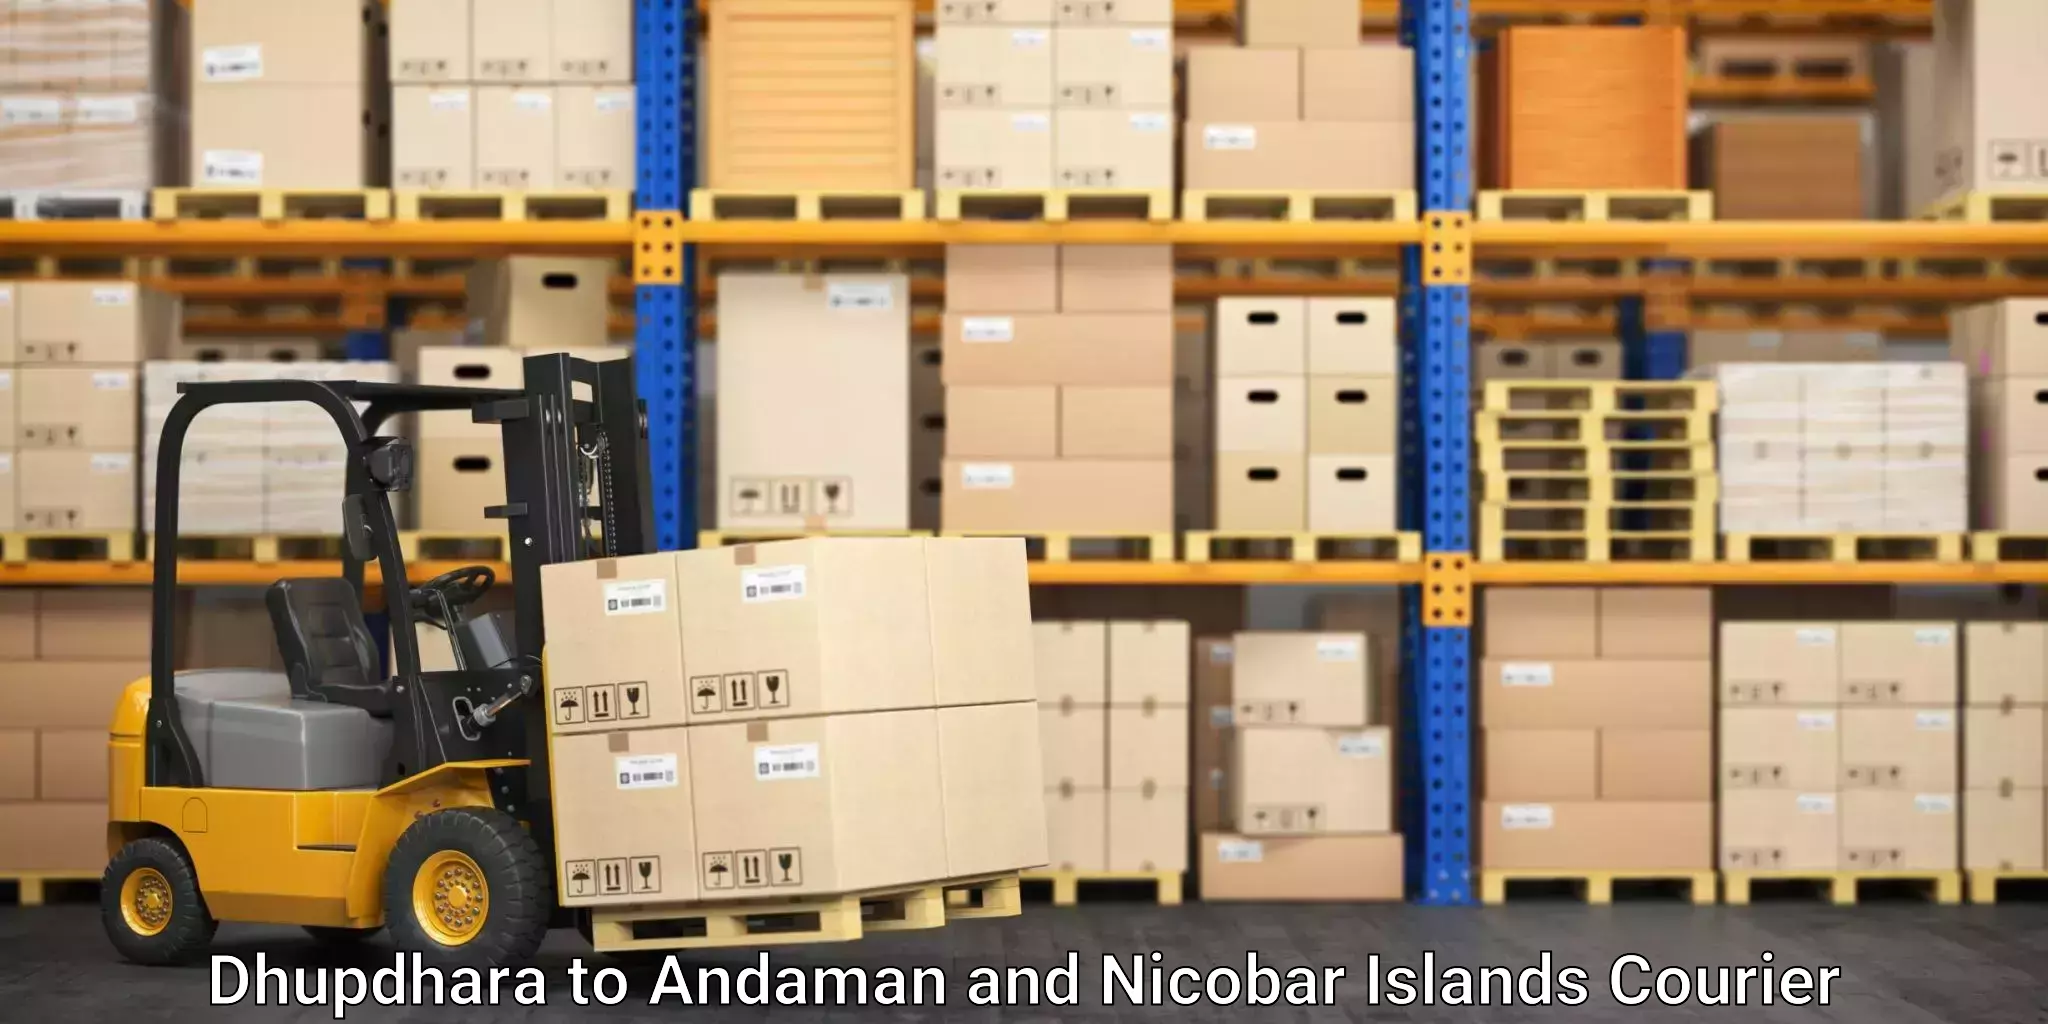 Parcel service for businesses Dhupdhara to Andaman and Nicobar Islands